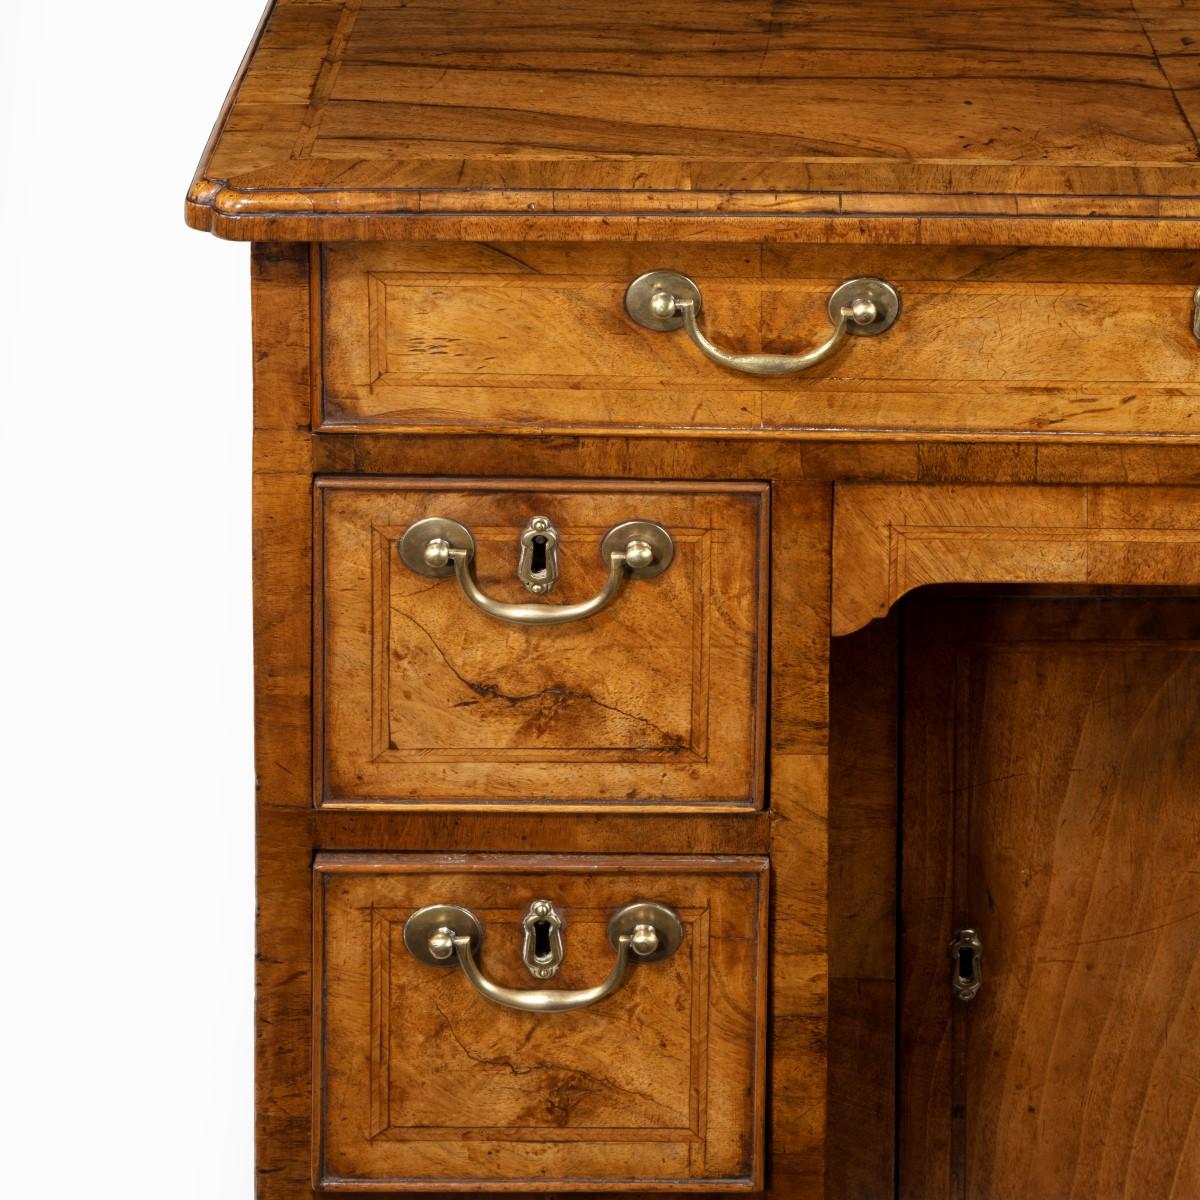 Early George III Walnut Kneehole Desk In Good Condition For Sale In Lymington, Hampshire